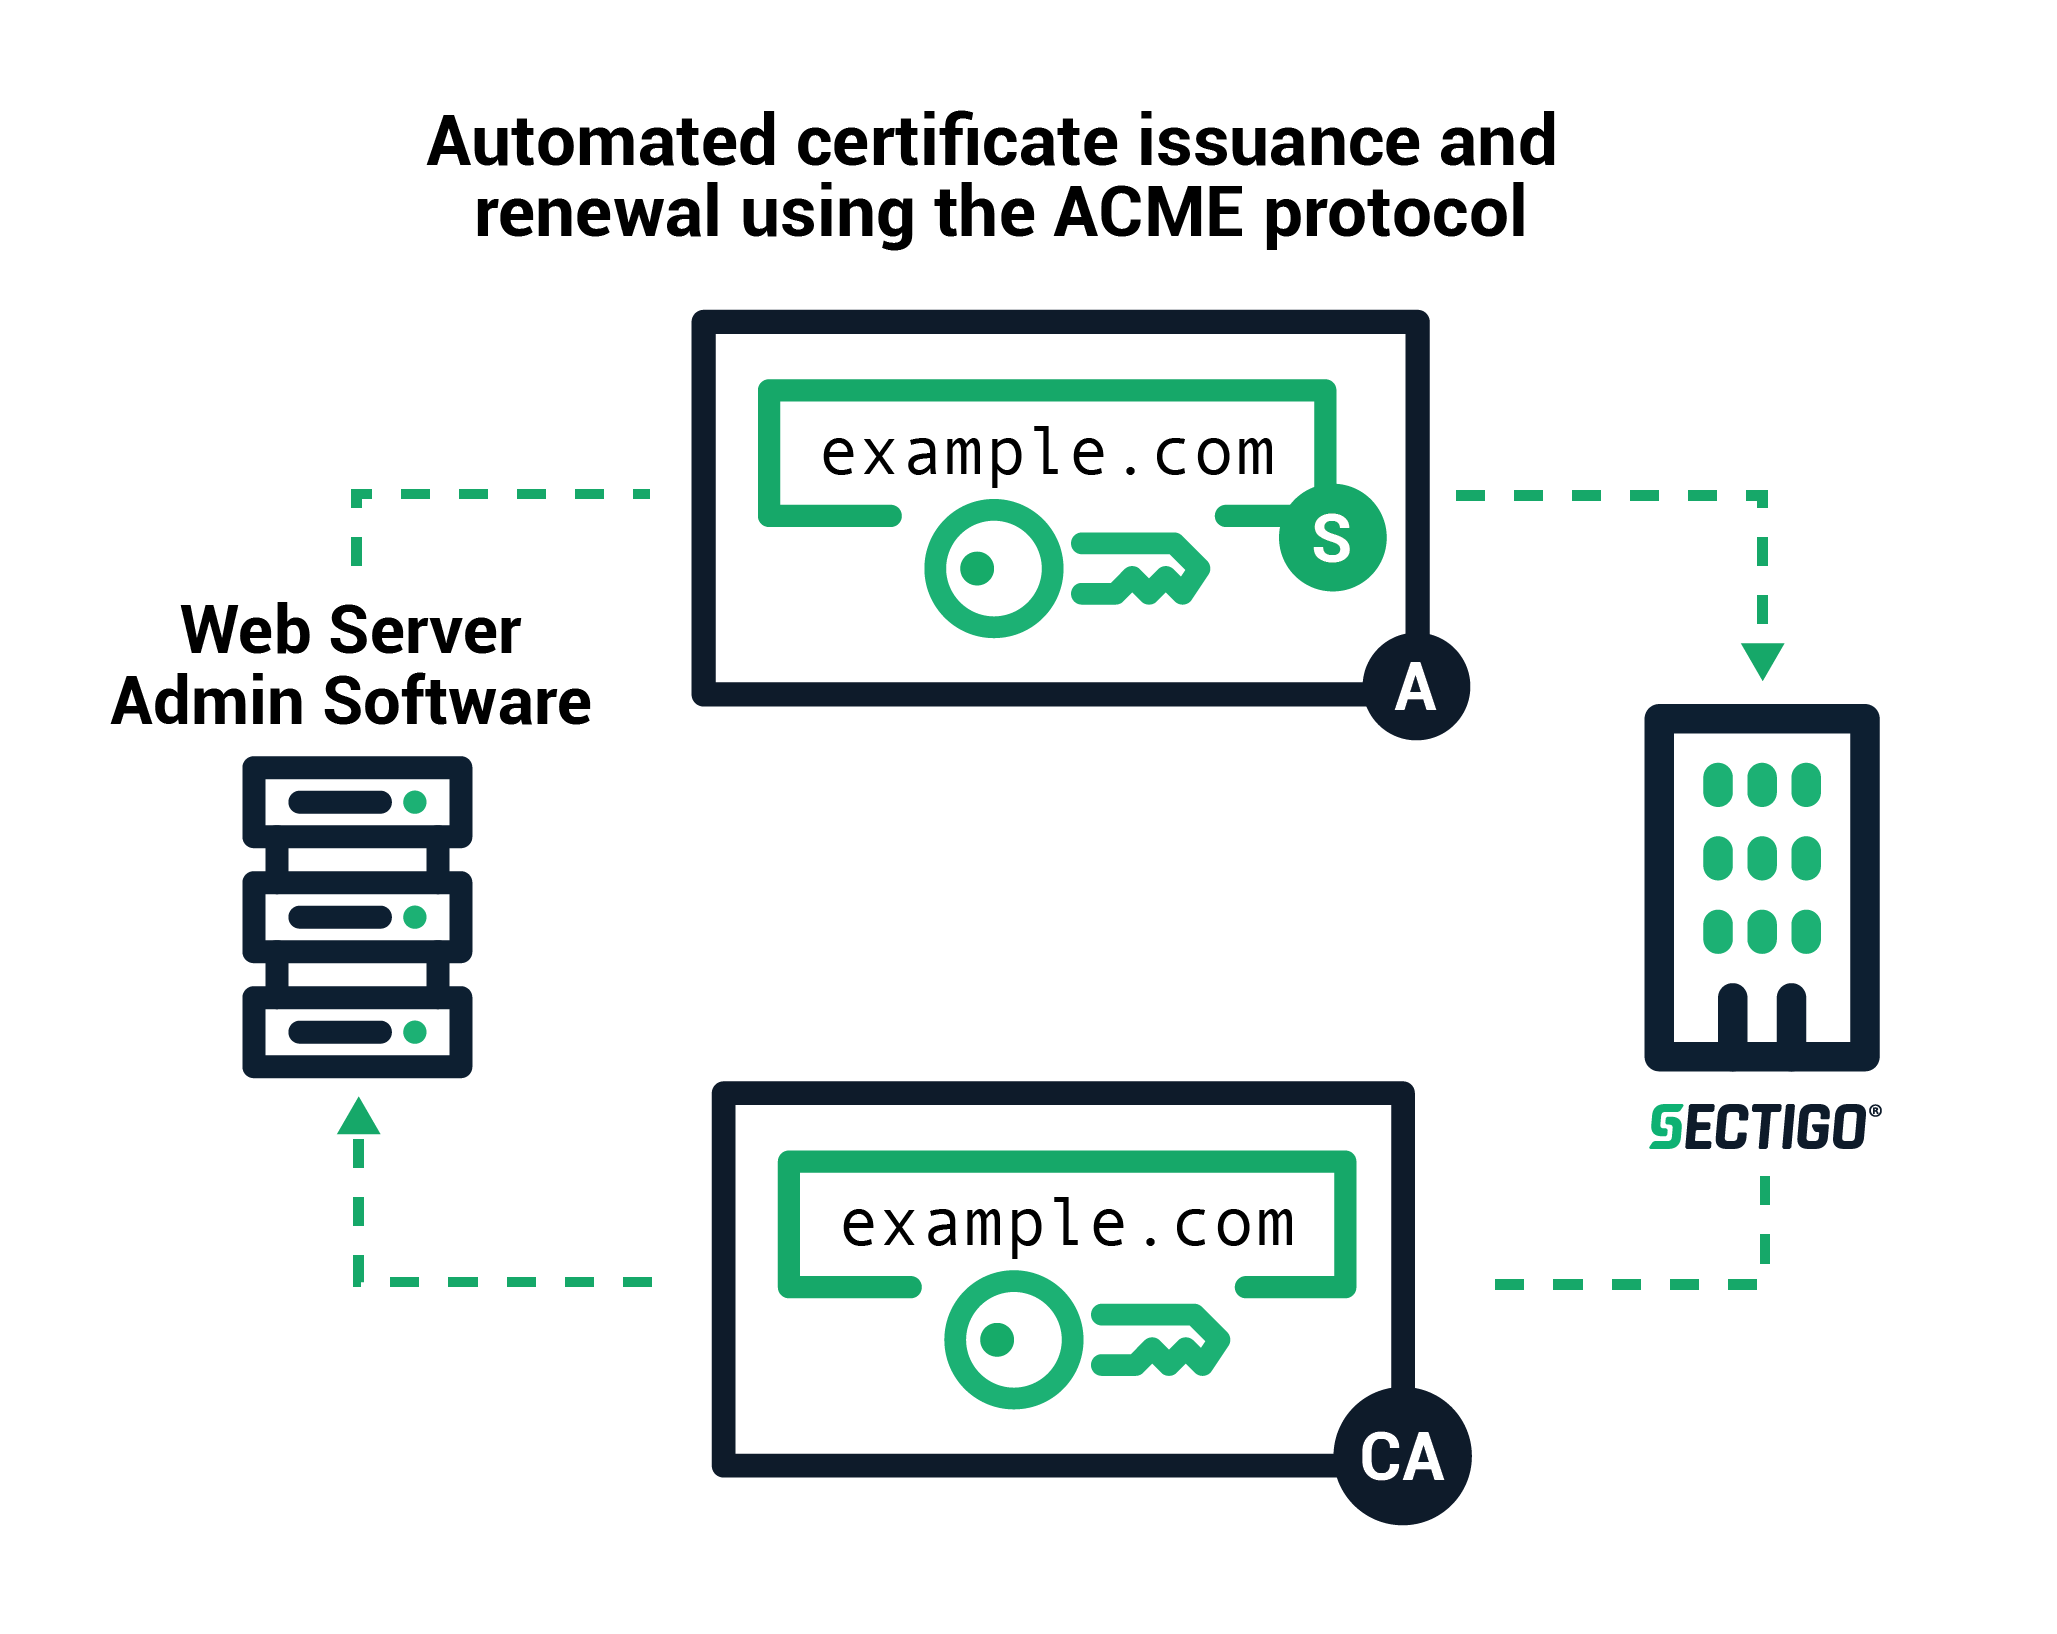 Automated certificate issuance and renewal using the ACME protocol